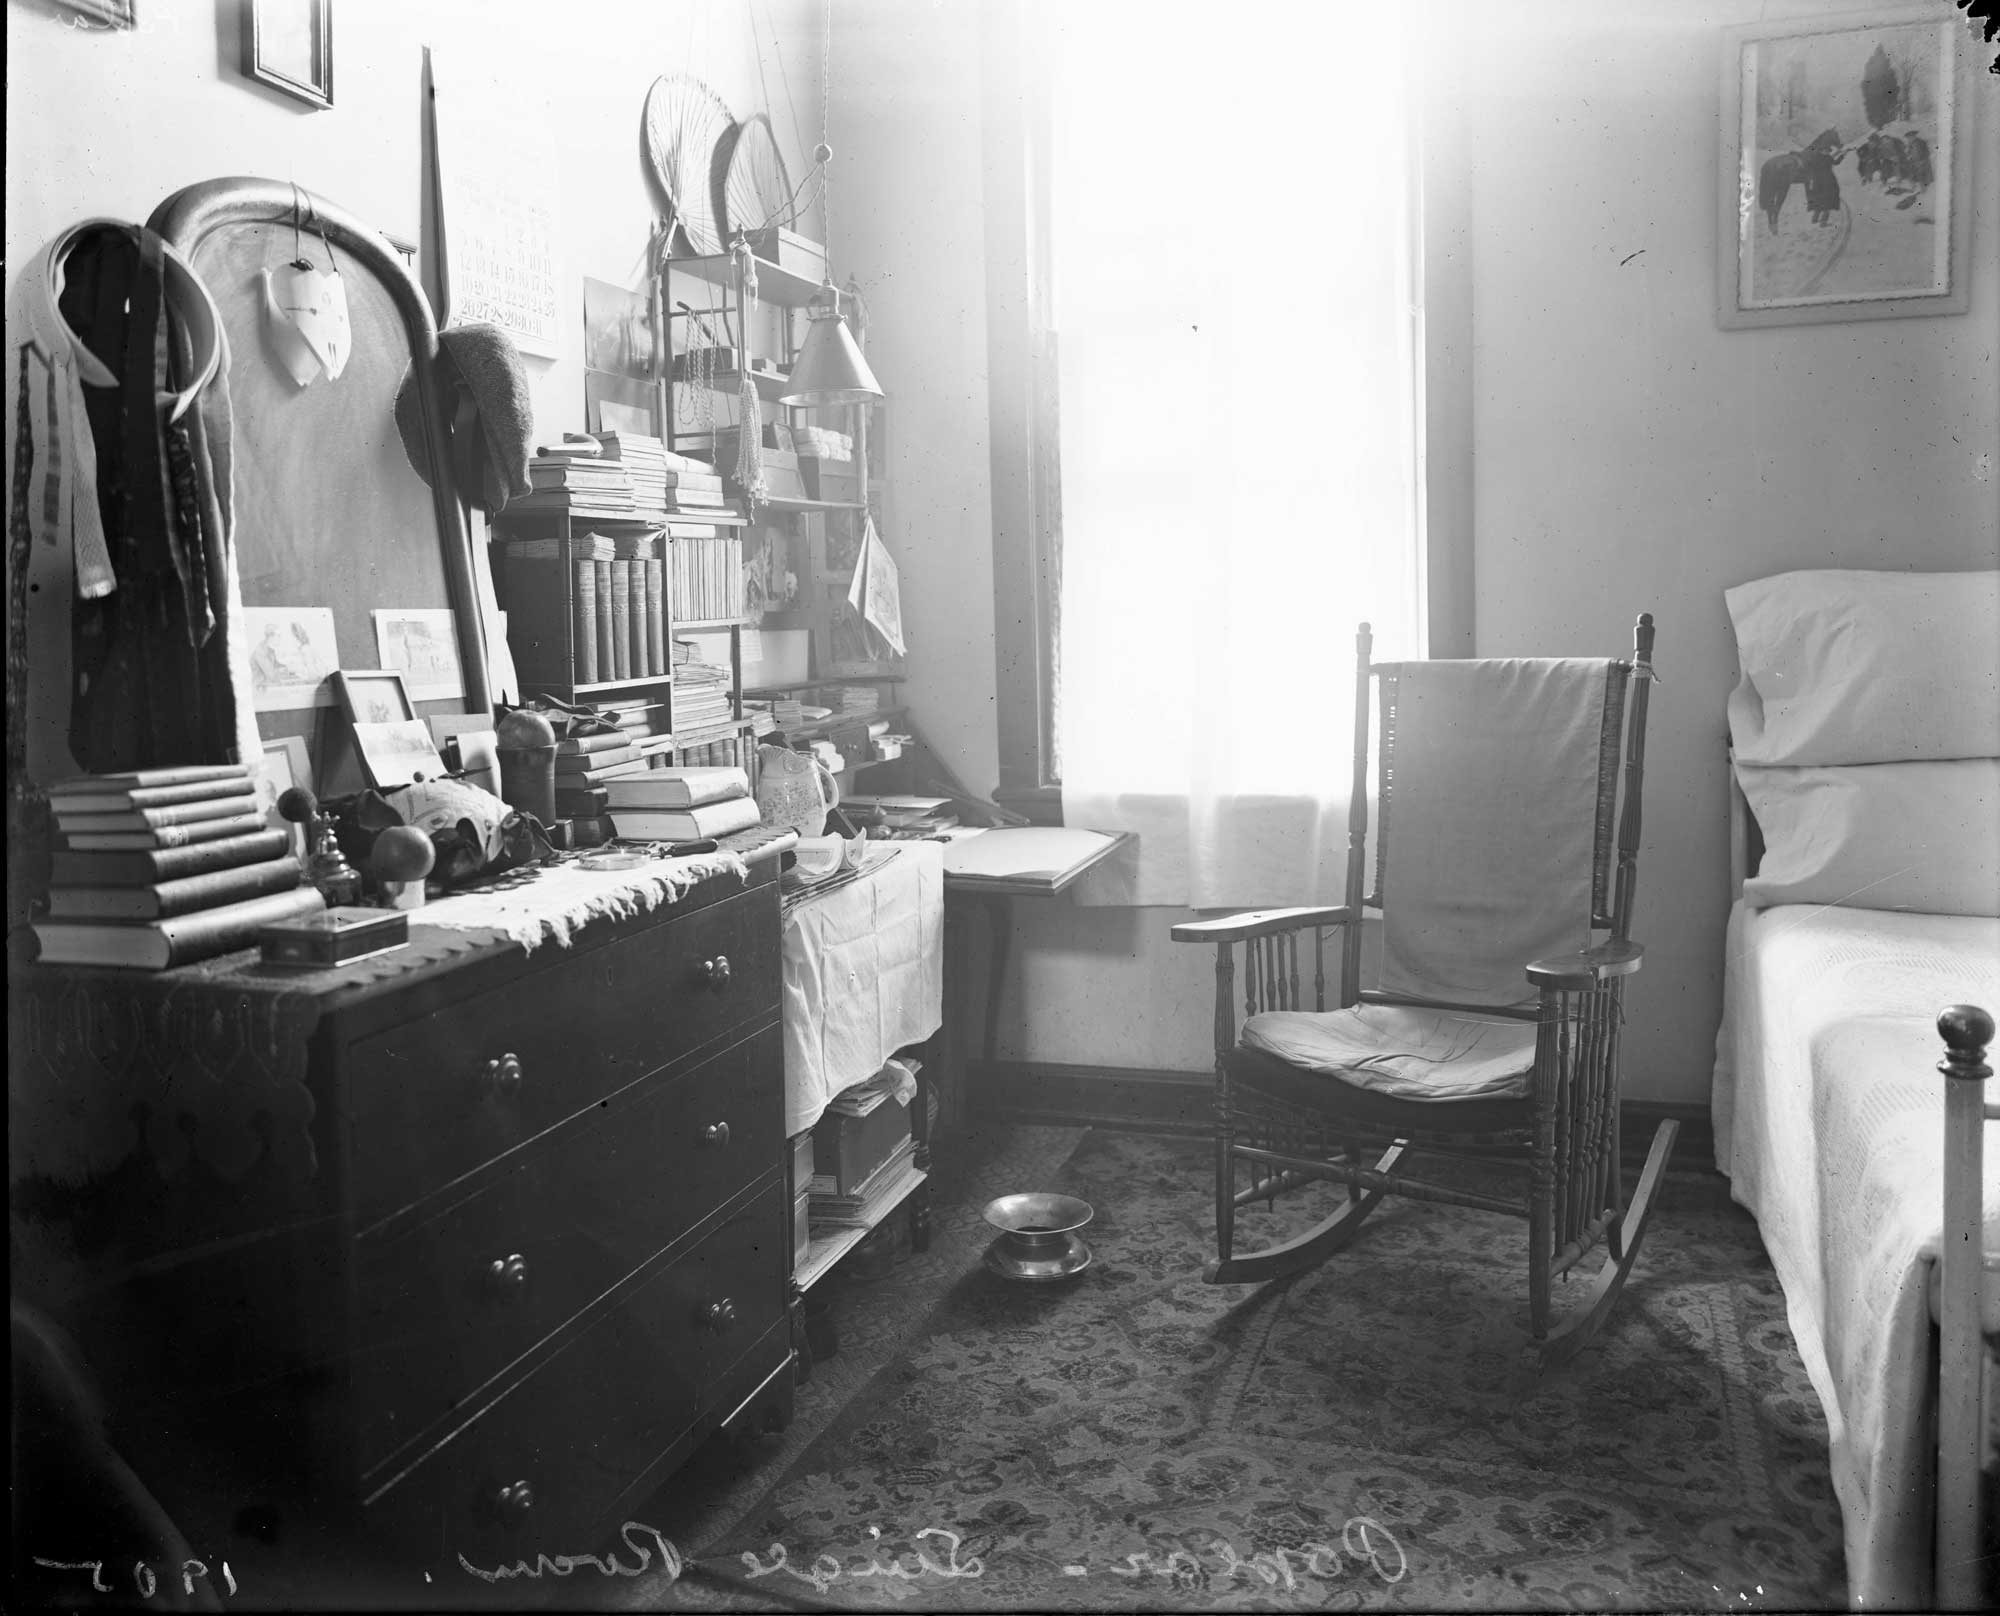 Patient Room, Poplar Ward, the Center Building. Photograph, 1905. Decoration in the Center Building rooms varied widely in the 19th century depending on the severity and type of illness, as well as a patient’s wealth. Courtesy National Archives and Records Administration.